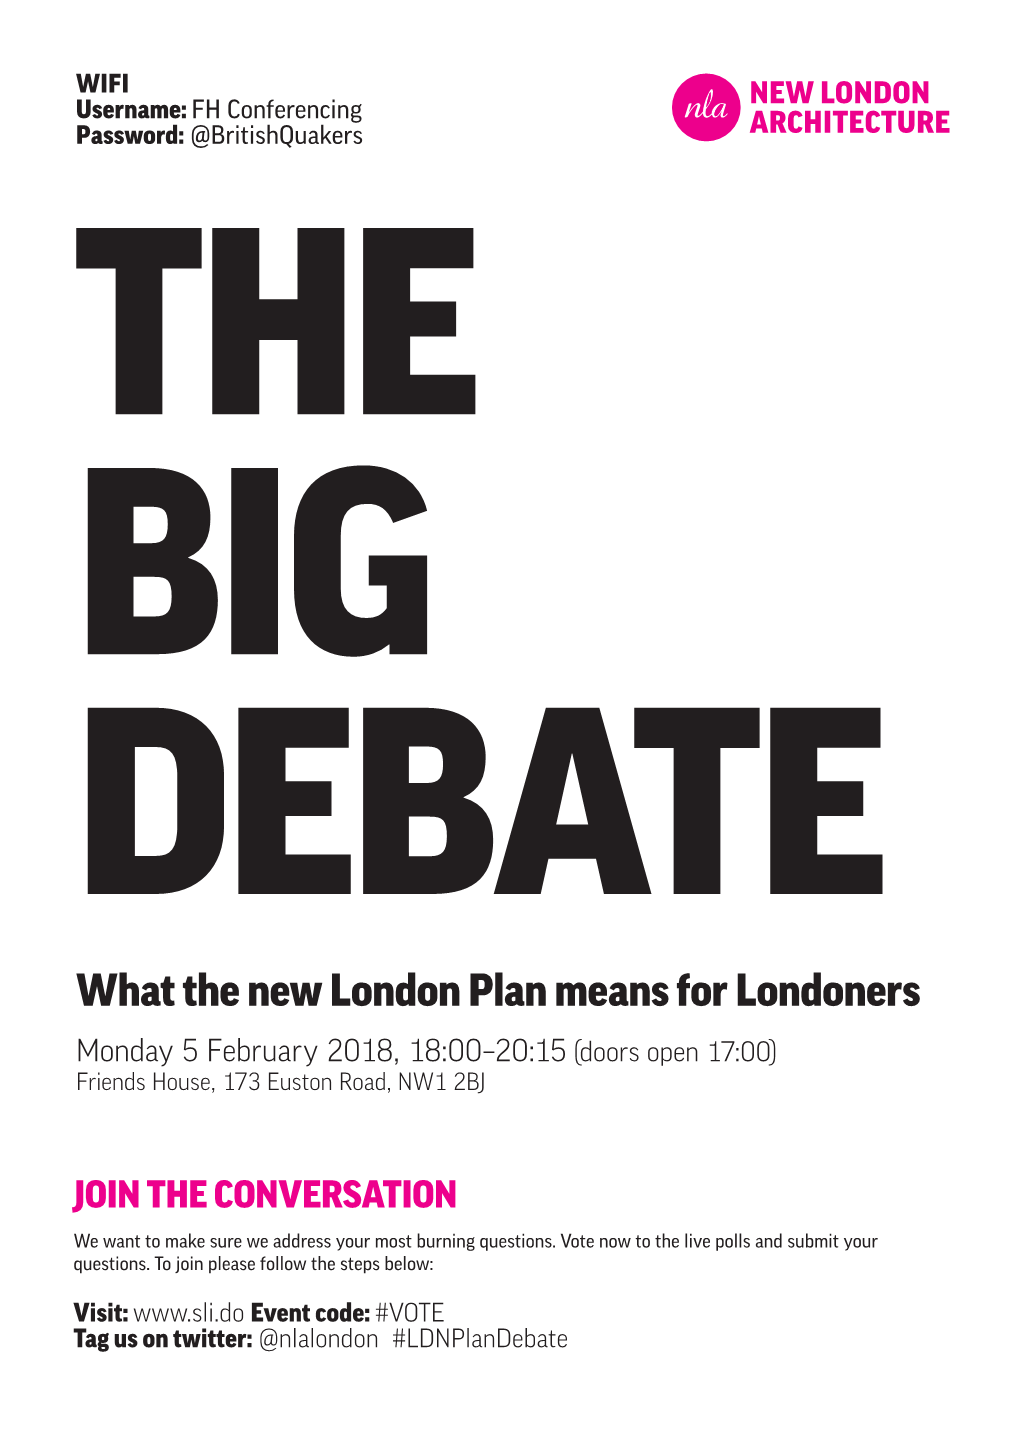 What the New London Plan Means for Londoners